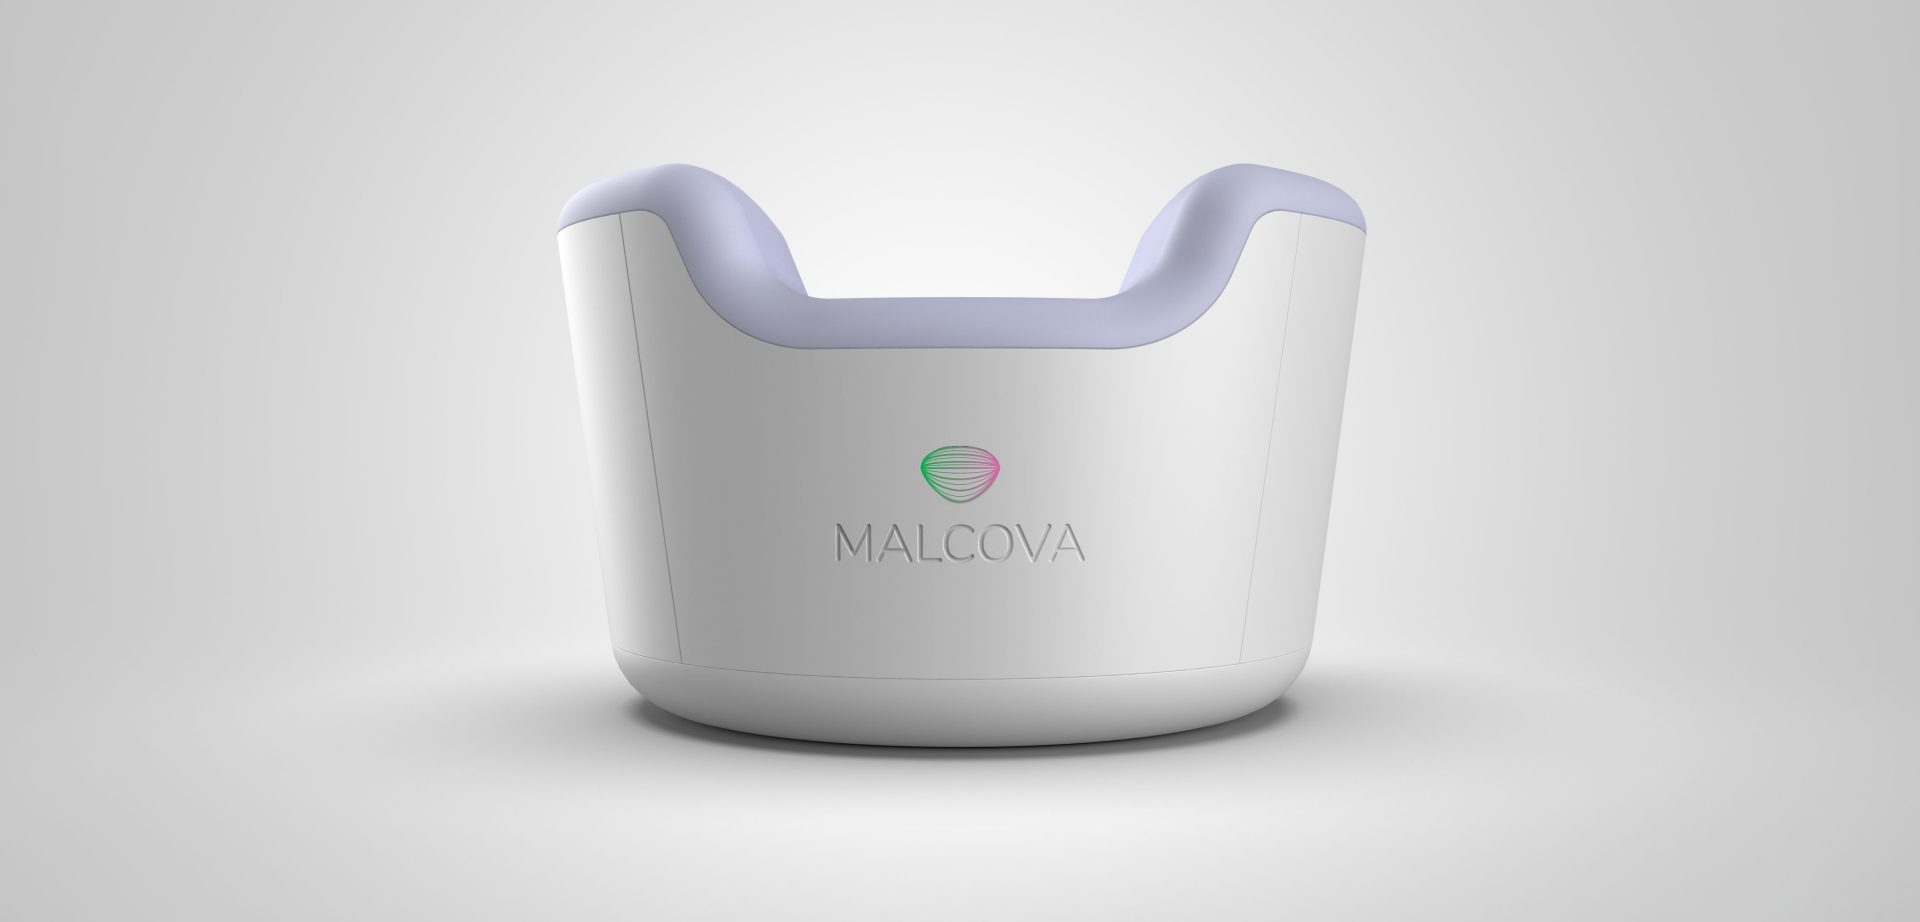 3D rendering of Malcova's innovative new breast imaging technology. Modern ergonomic white device with purple accents and the Malcova logo on the front against a light gray background.